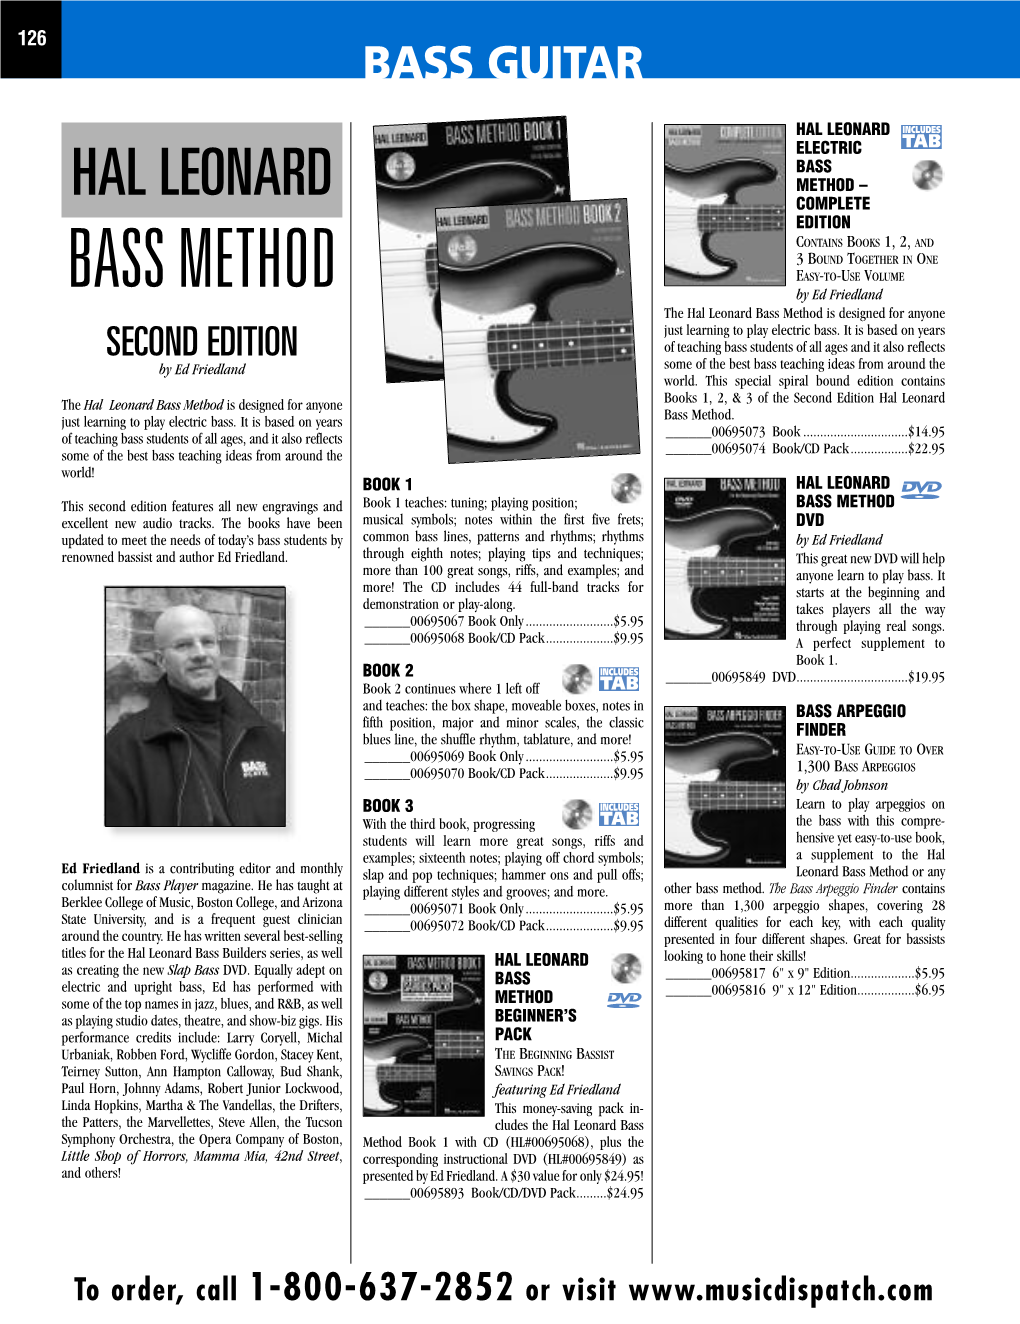 BASS METHOD EASY-TO-USE VOLUME by Ed Friedland the Hal Leonard Bass Method Is Designed for Anyone Just Learning to Play Electric Bass